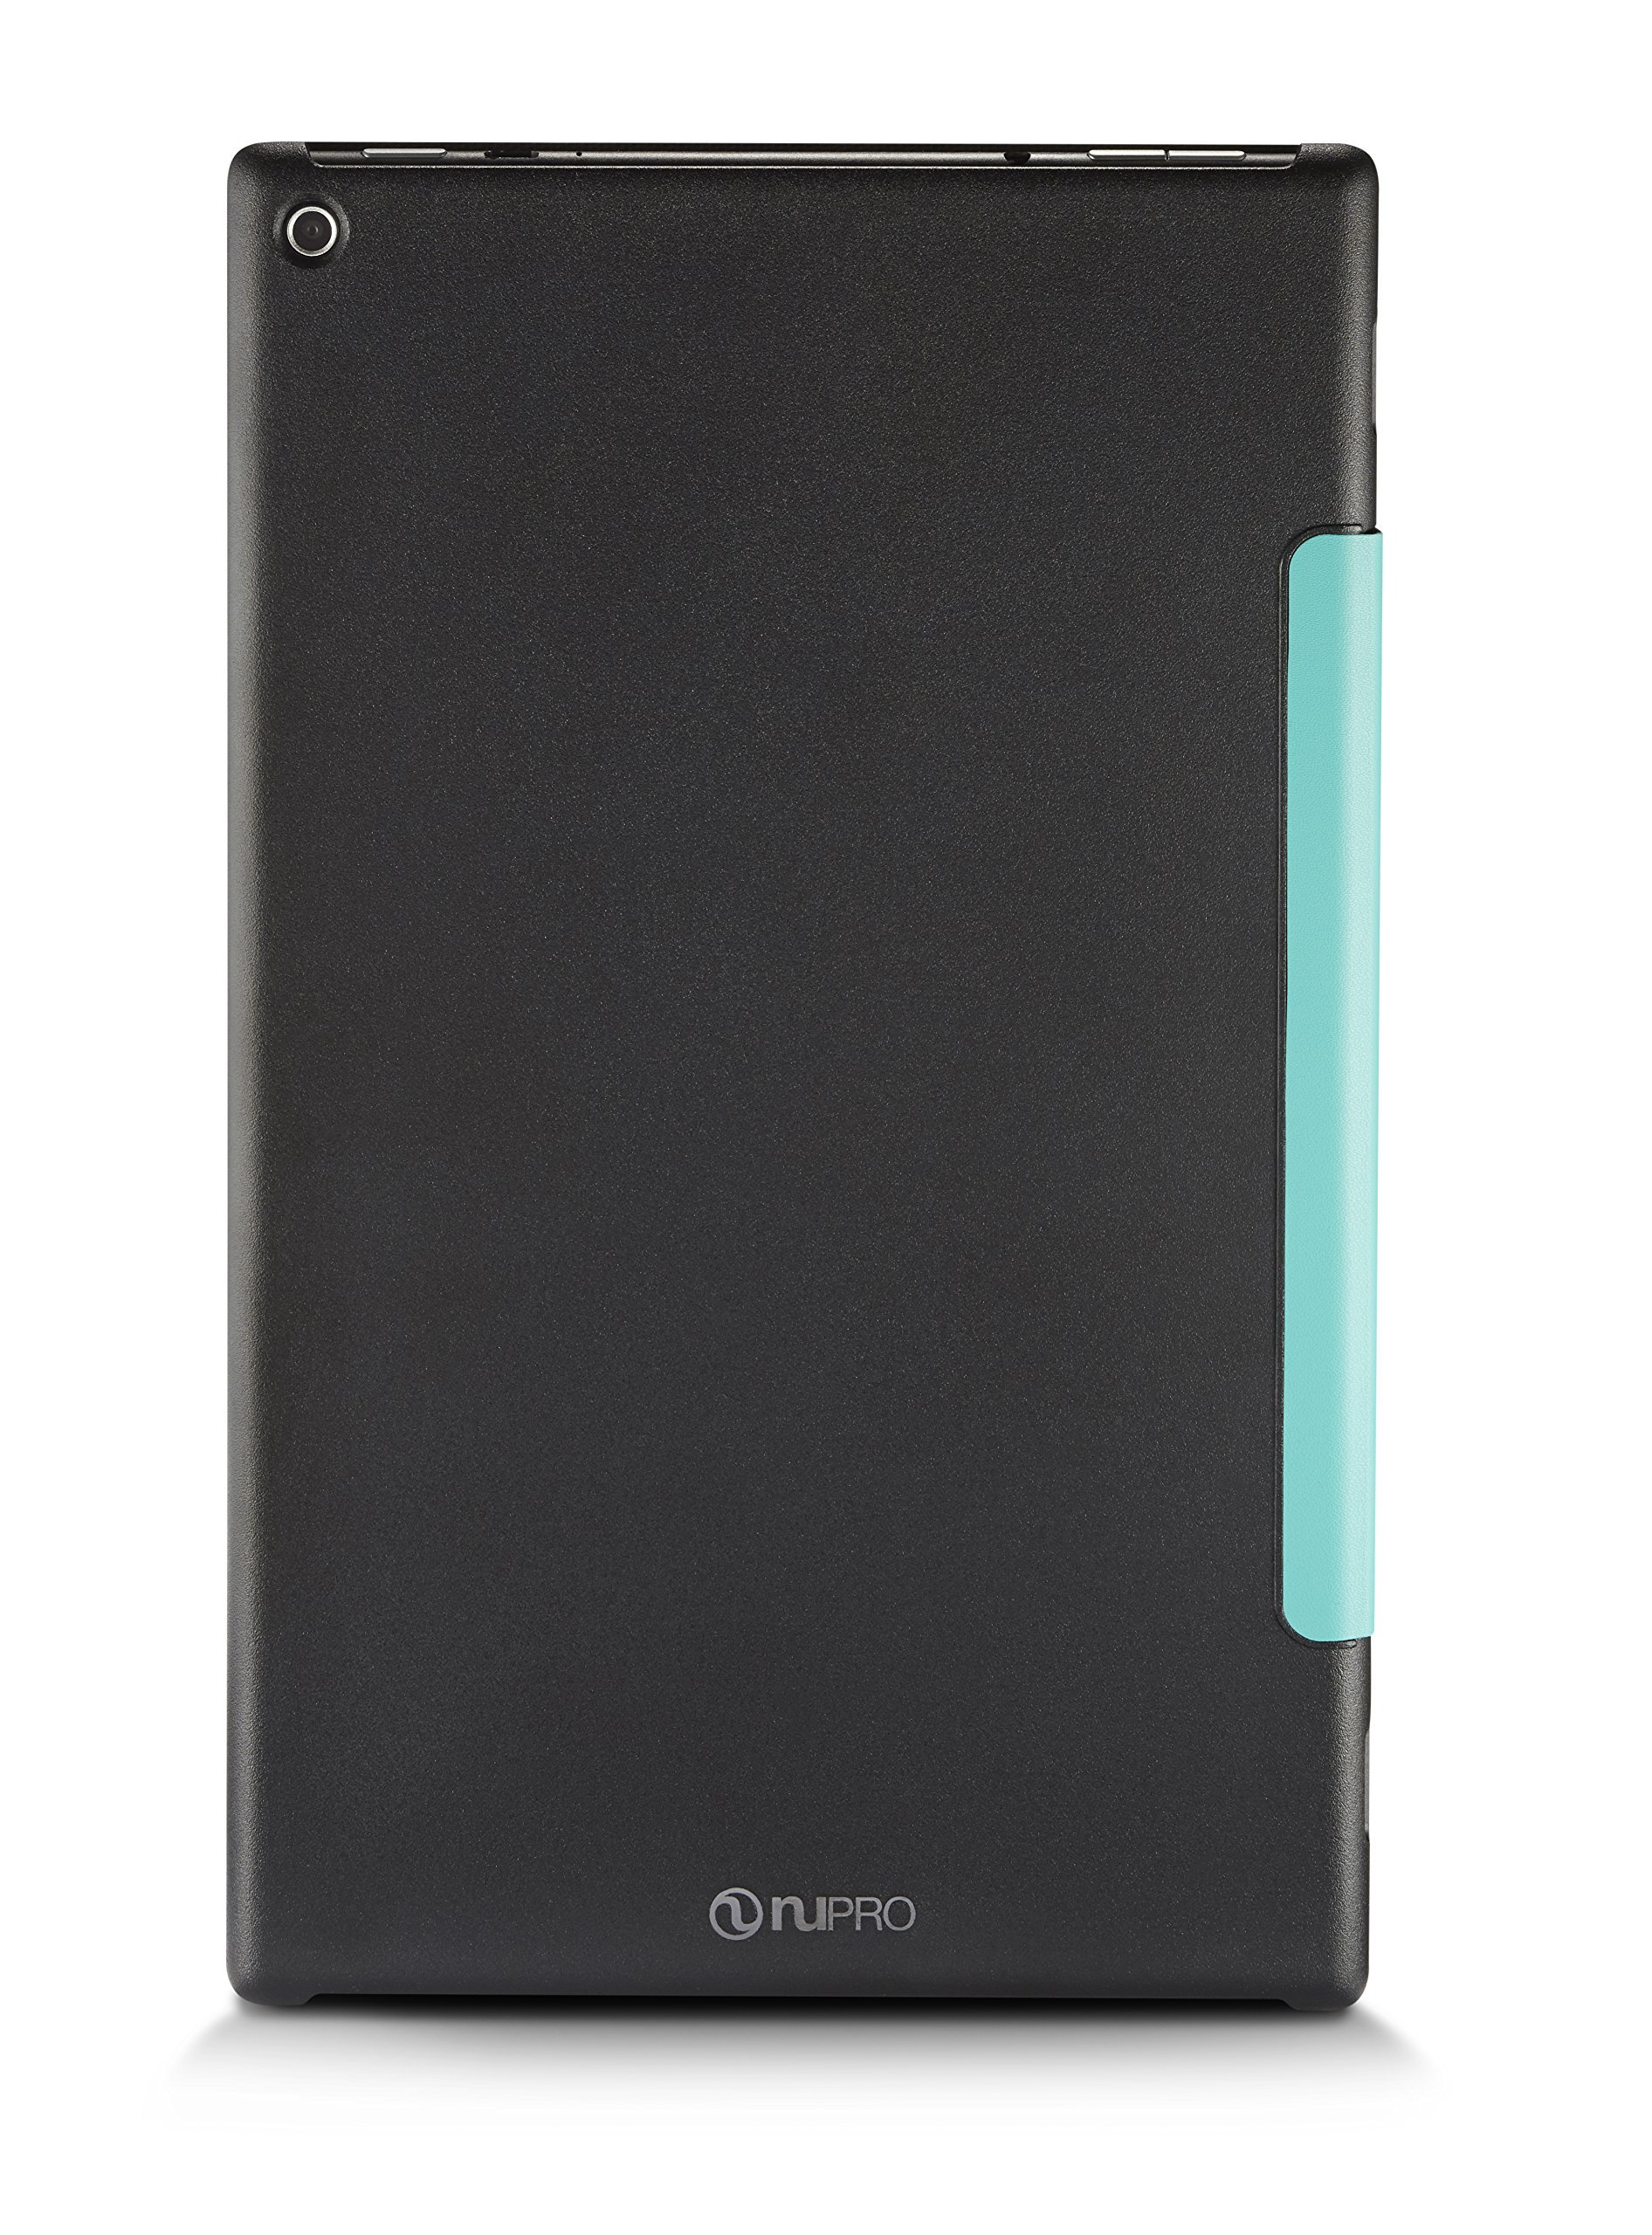 NuPro Fire HD 10 Slim Standing Case (5th Generation - 2015 release), Turquoise